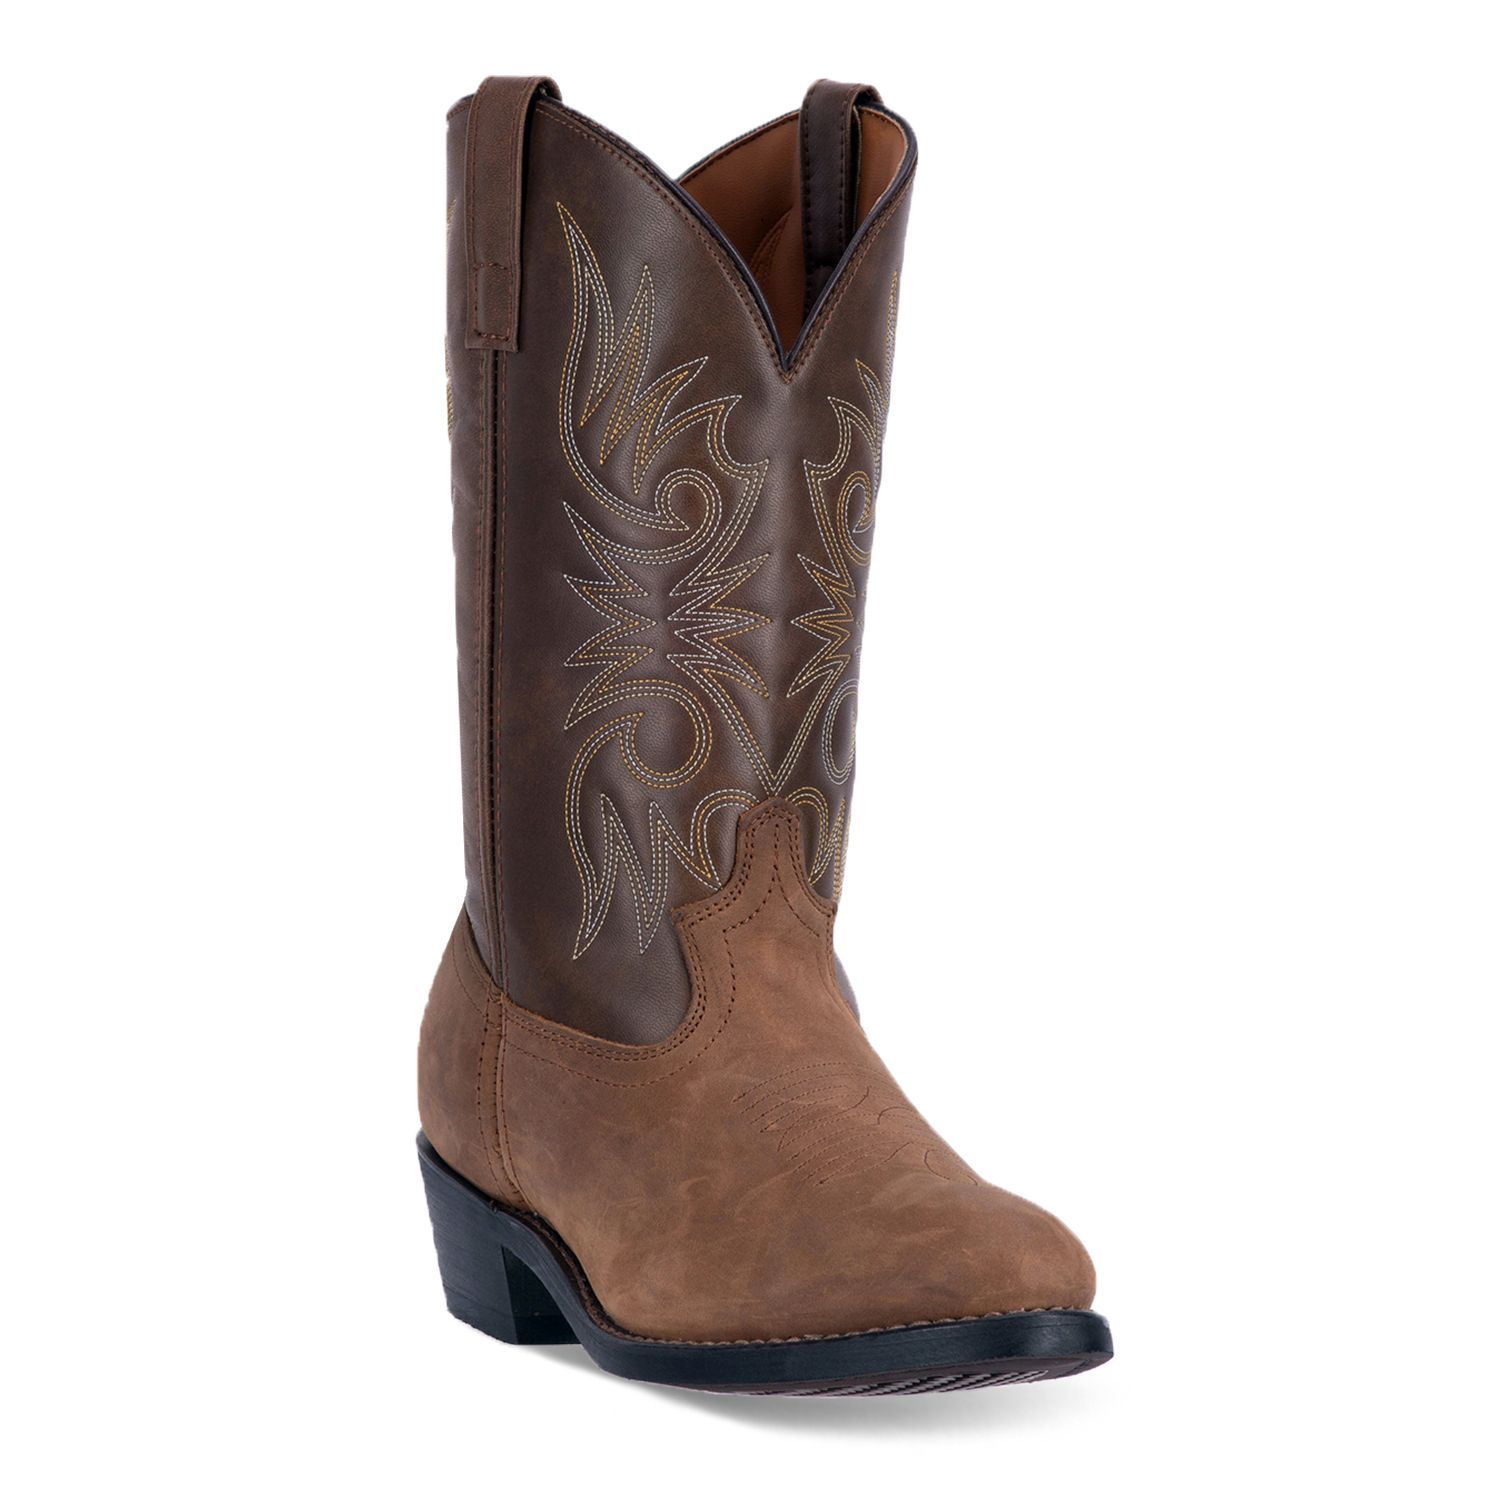 mens western boots on sale